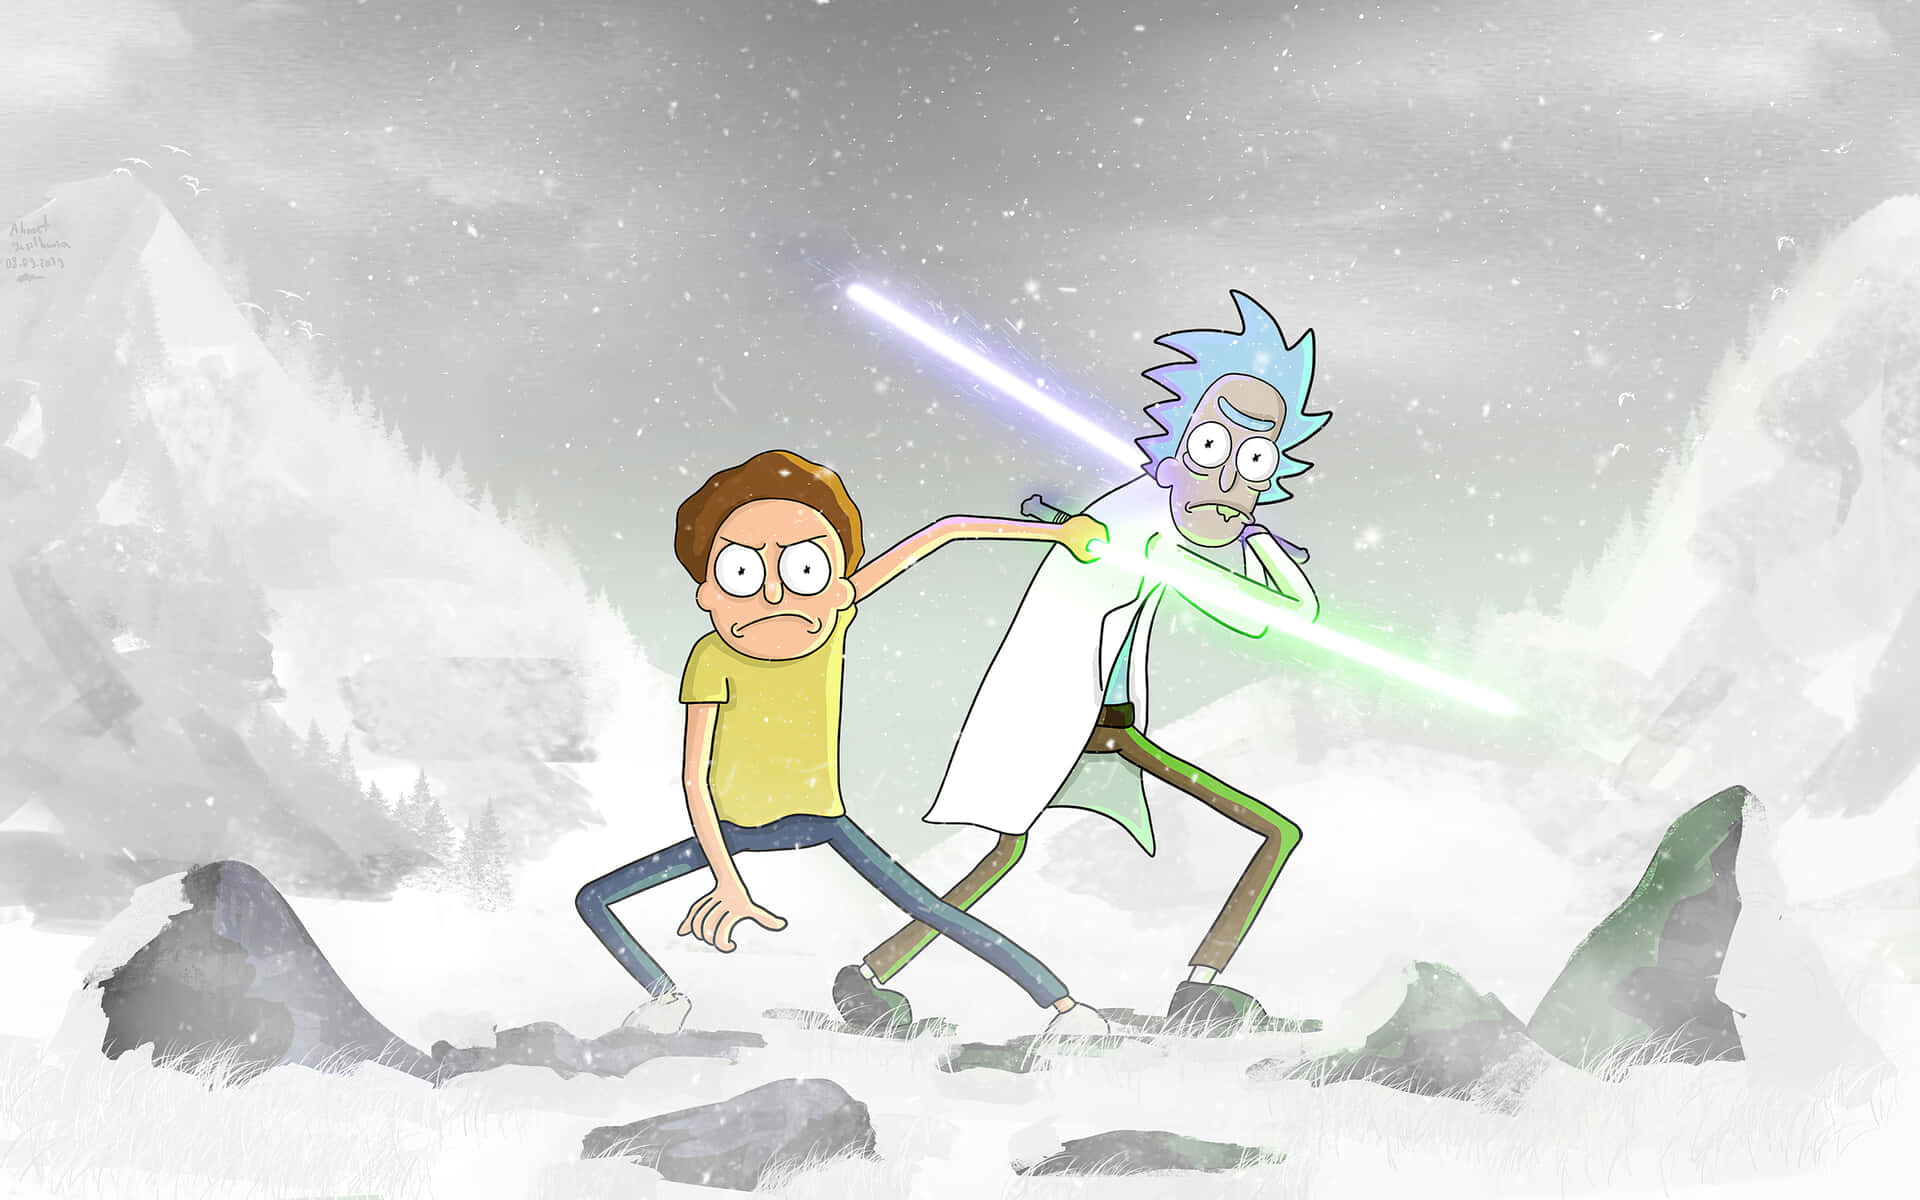 Rick And Morty Macbook Holding Lightsabers Snow Wallpaper